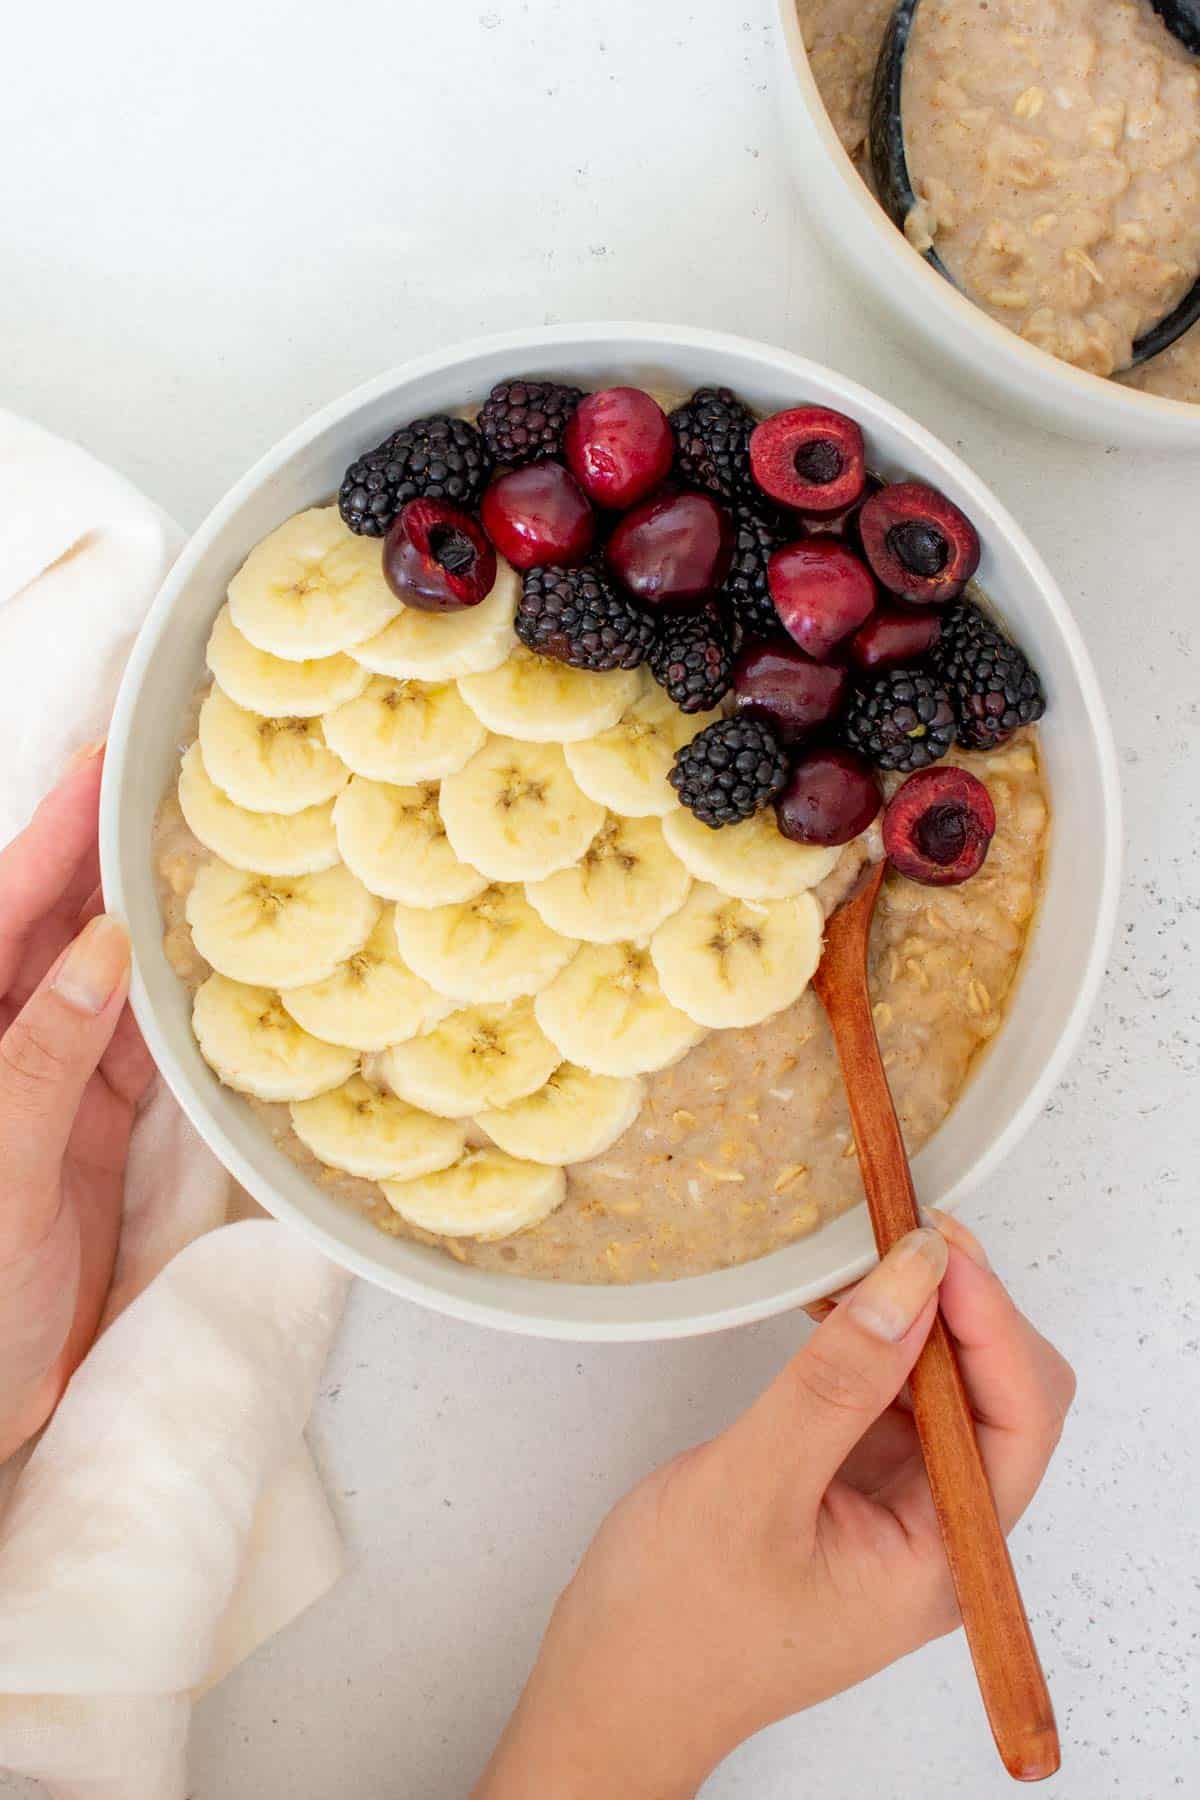 A bowl of egg white oatmeal topped with fresh berries and banana slices with a hand holding a spoon tucked into it.